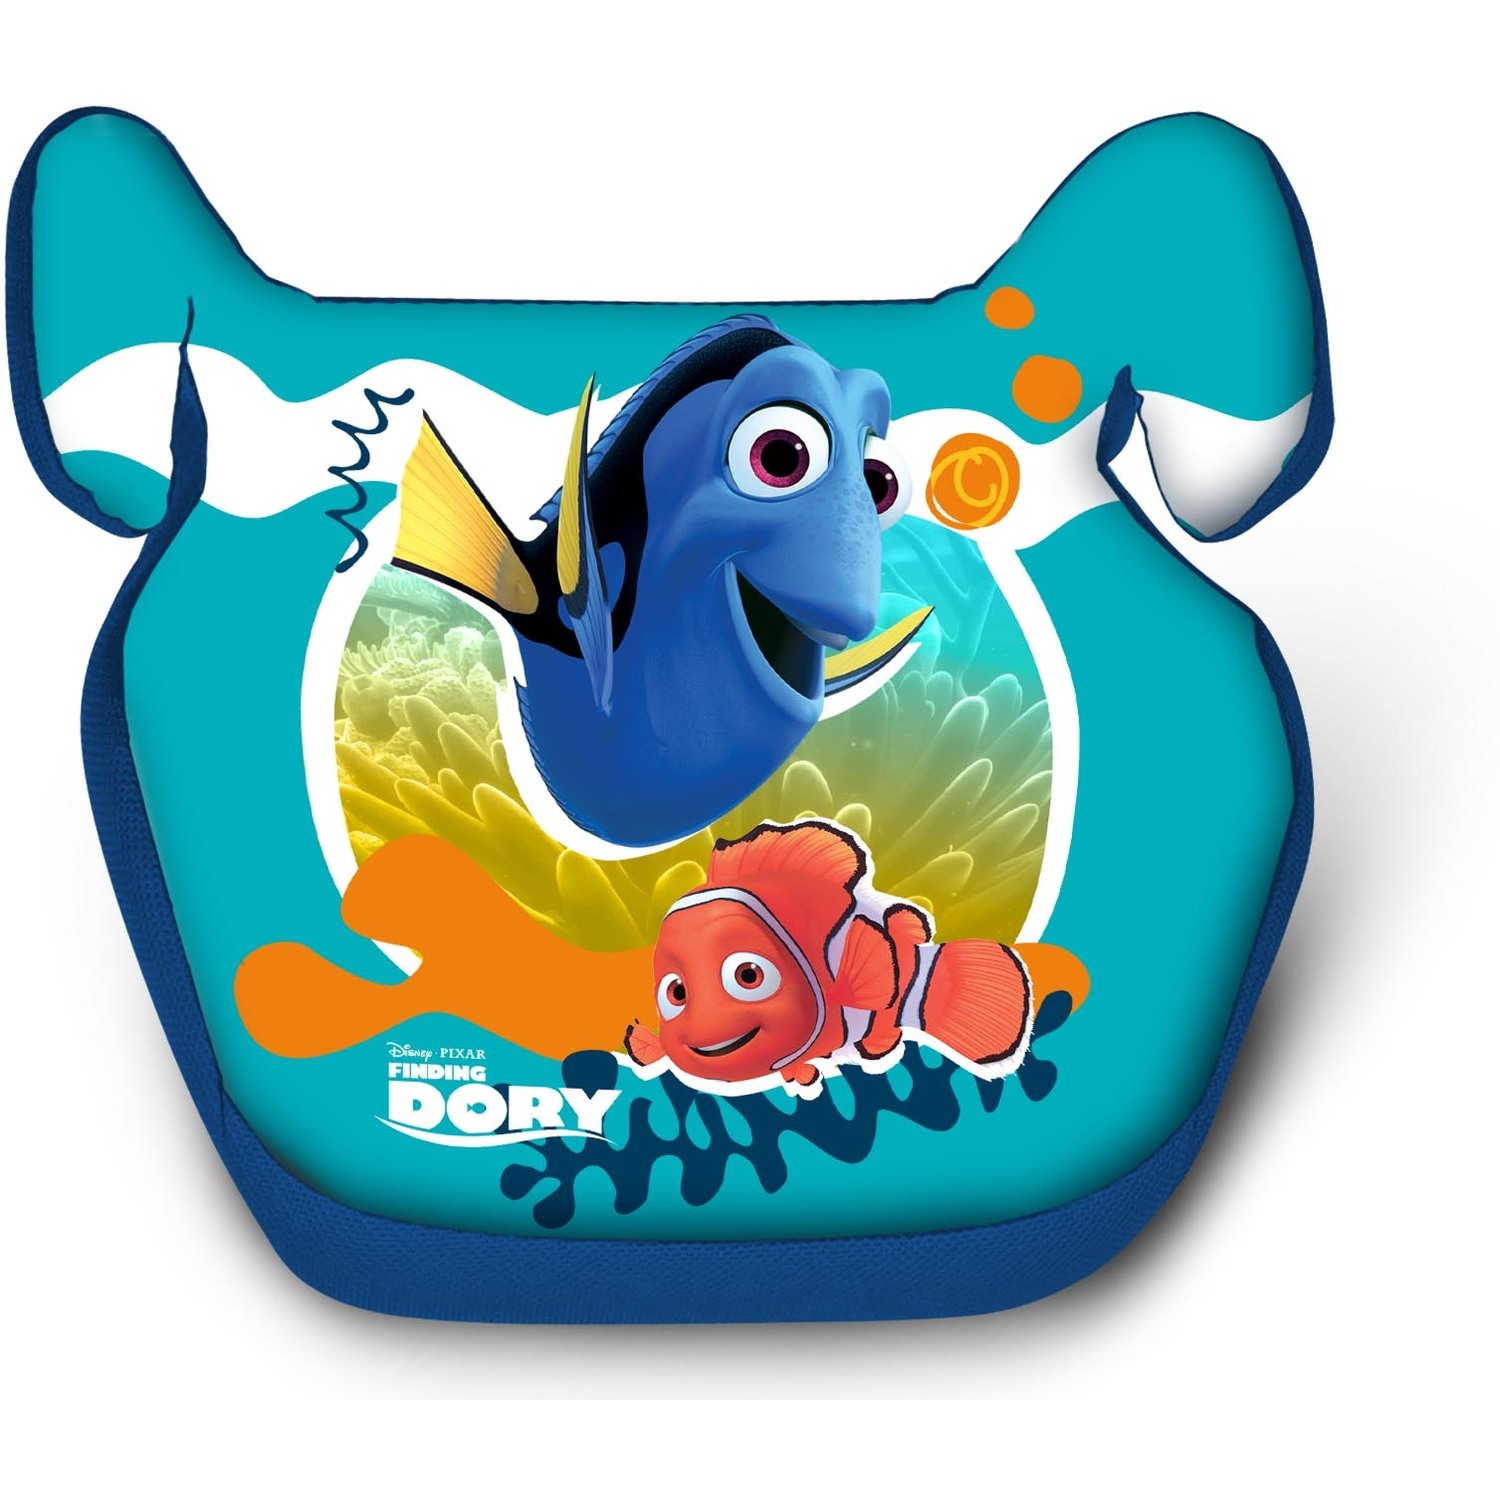 Inaltator Auto Finding Dory